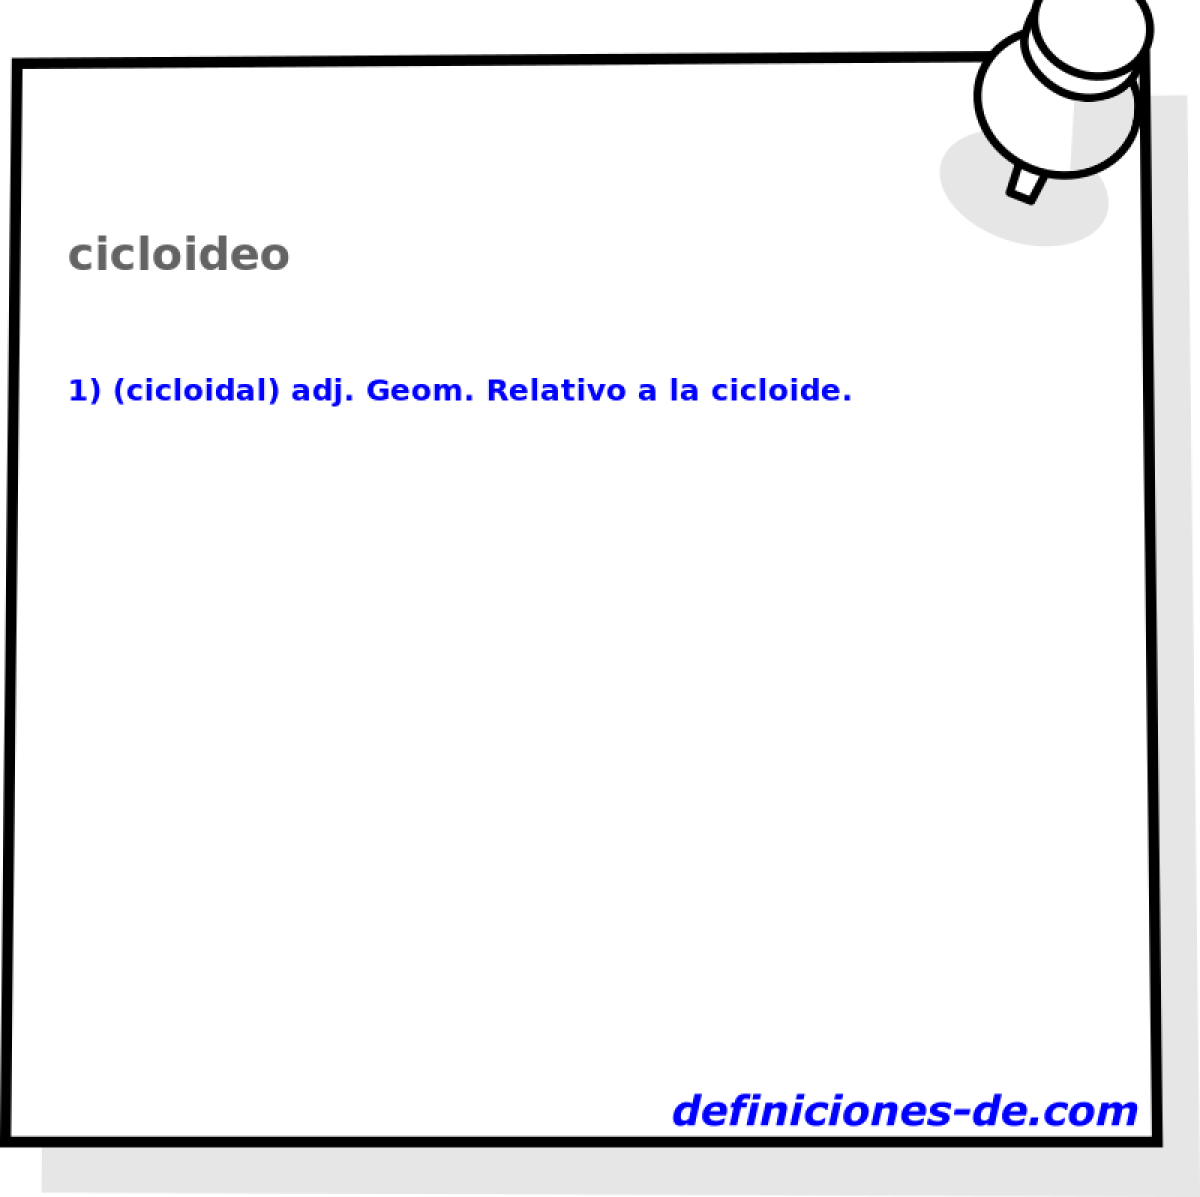 cicloideo 